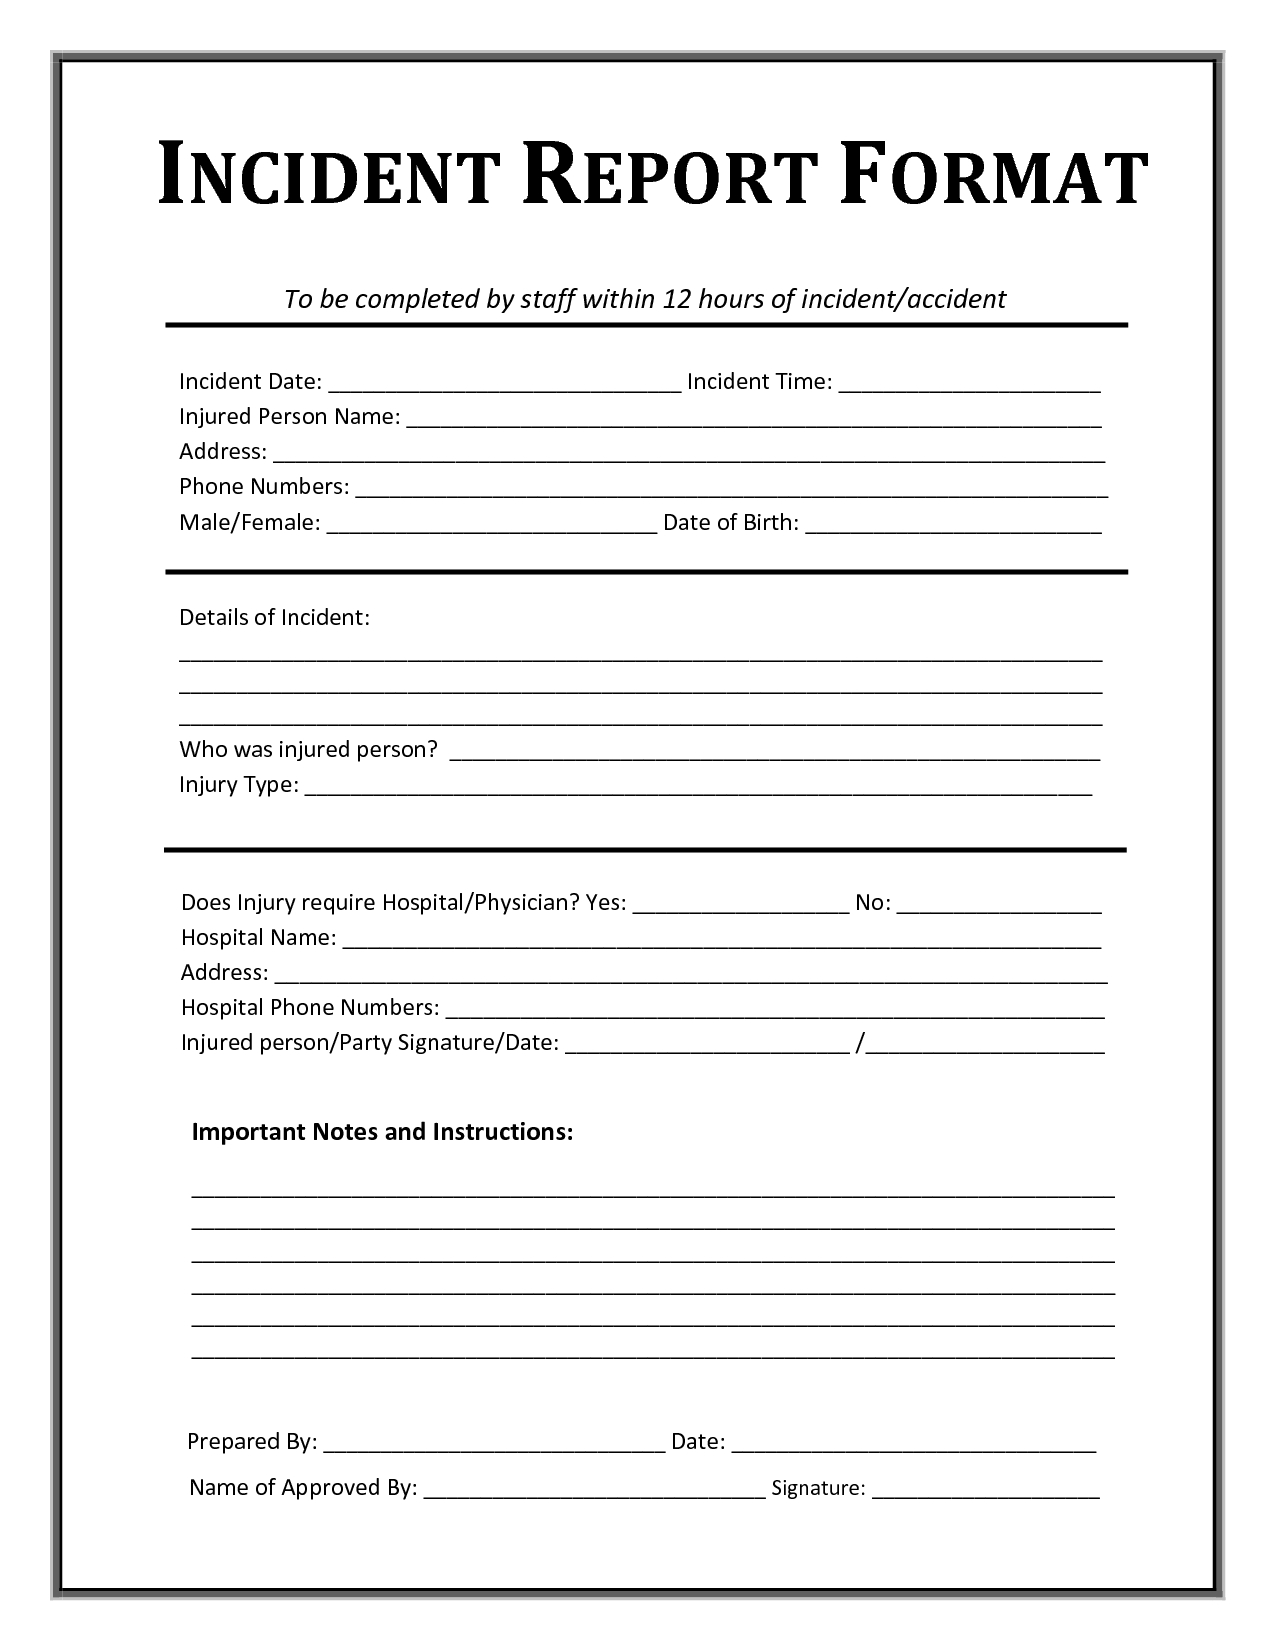 Incident Report Form Template Microsoft Excel  Report Templates with Incident Report Form Template Word